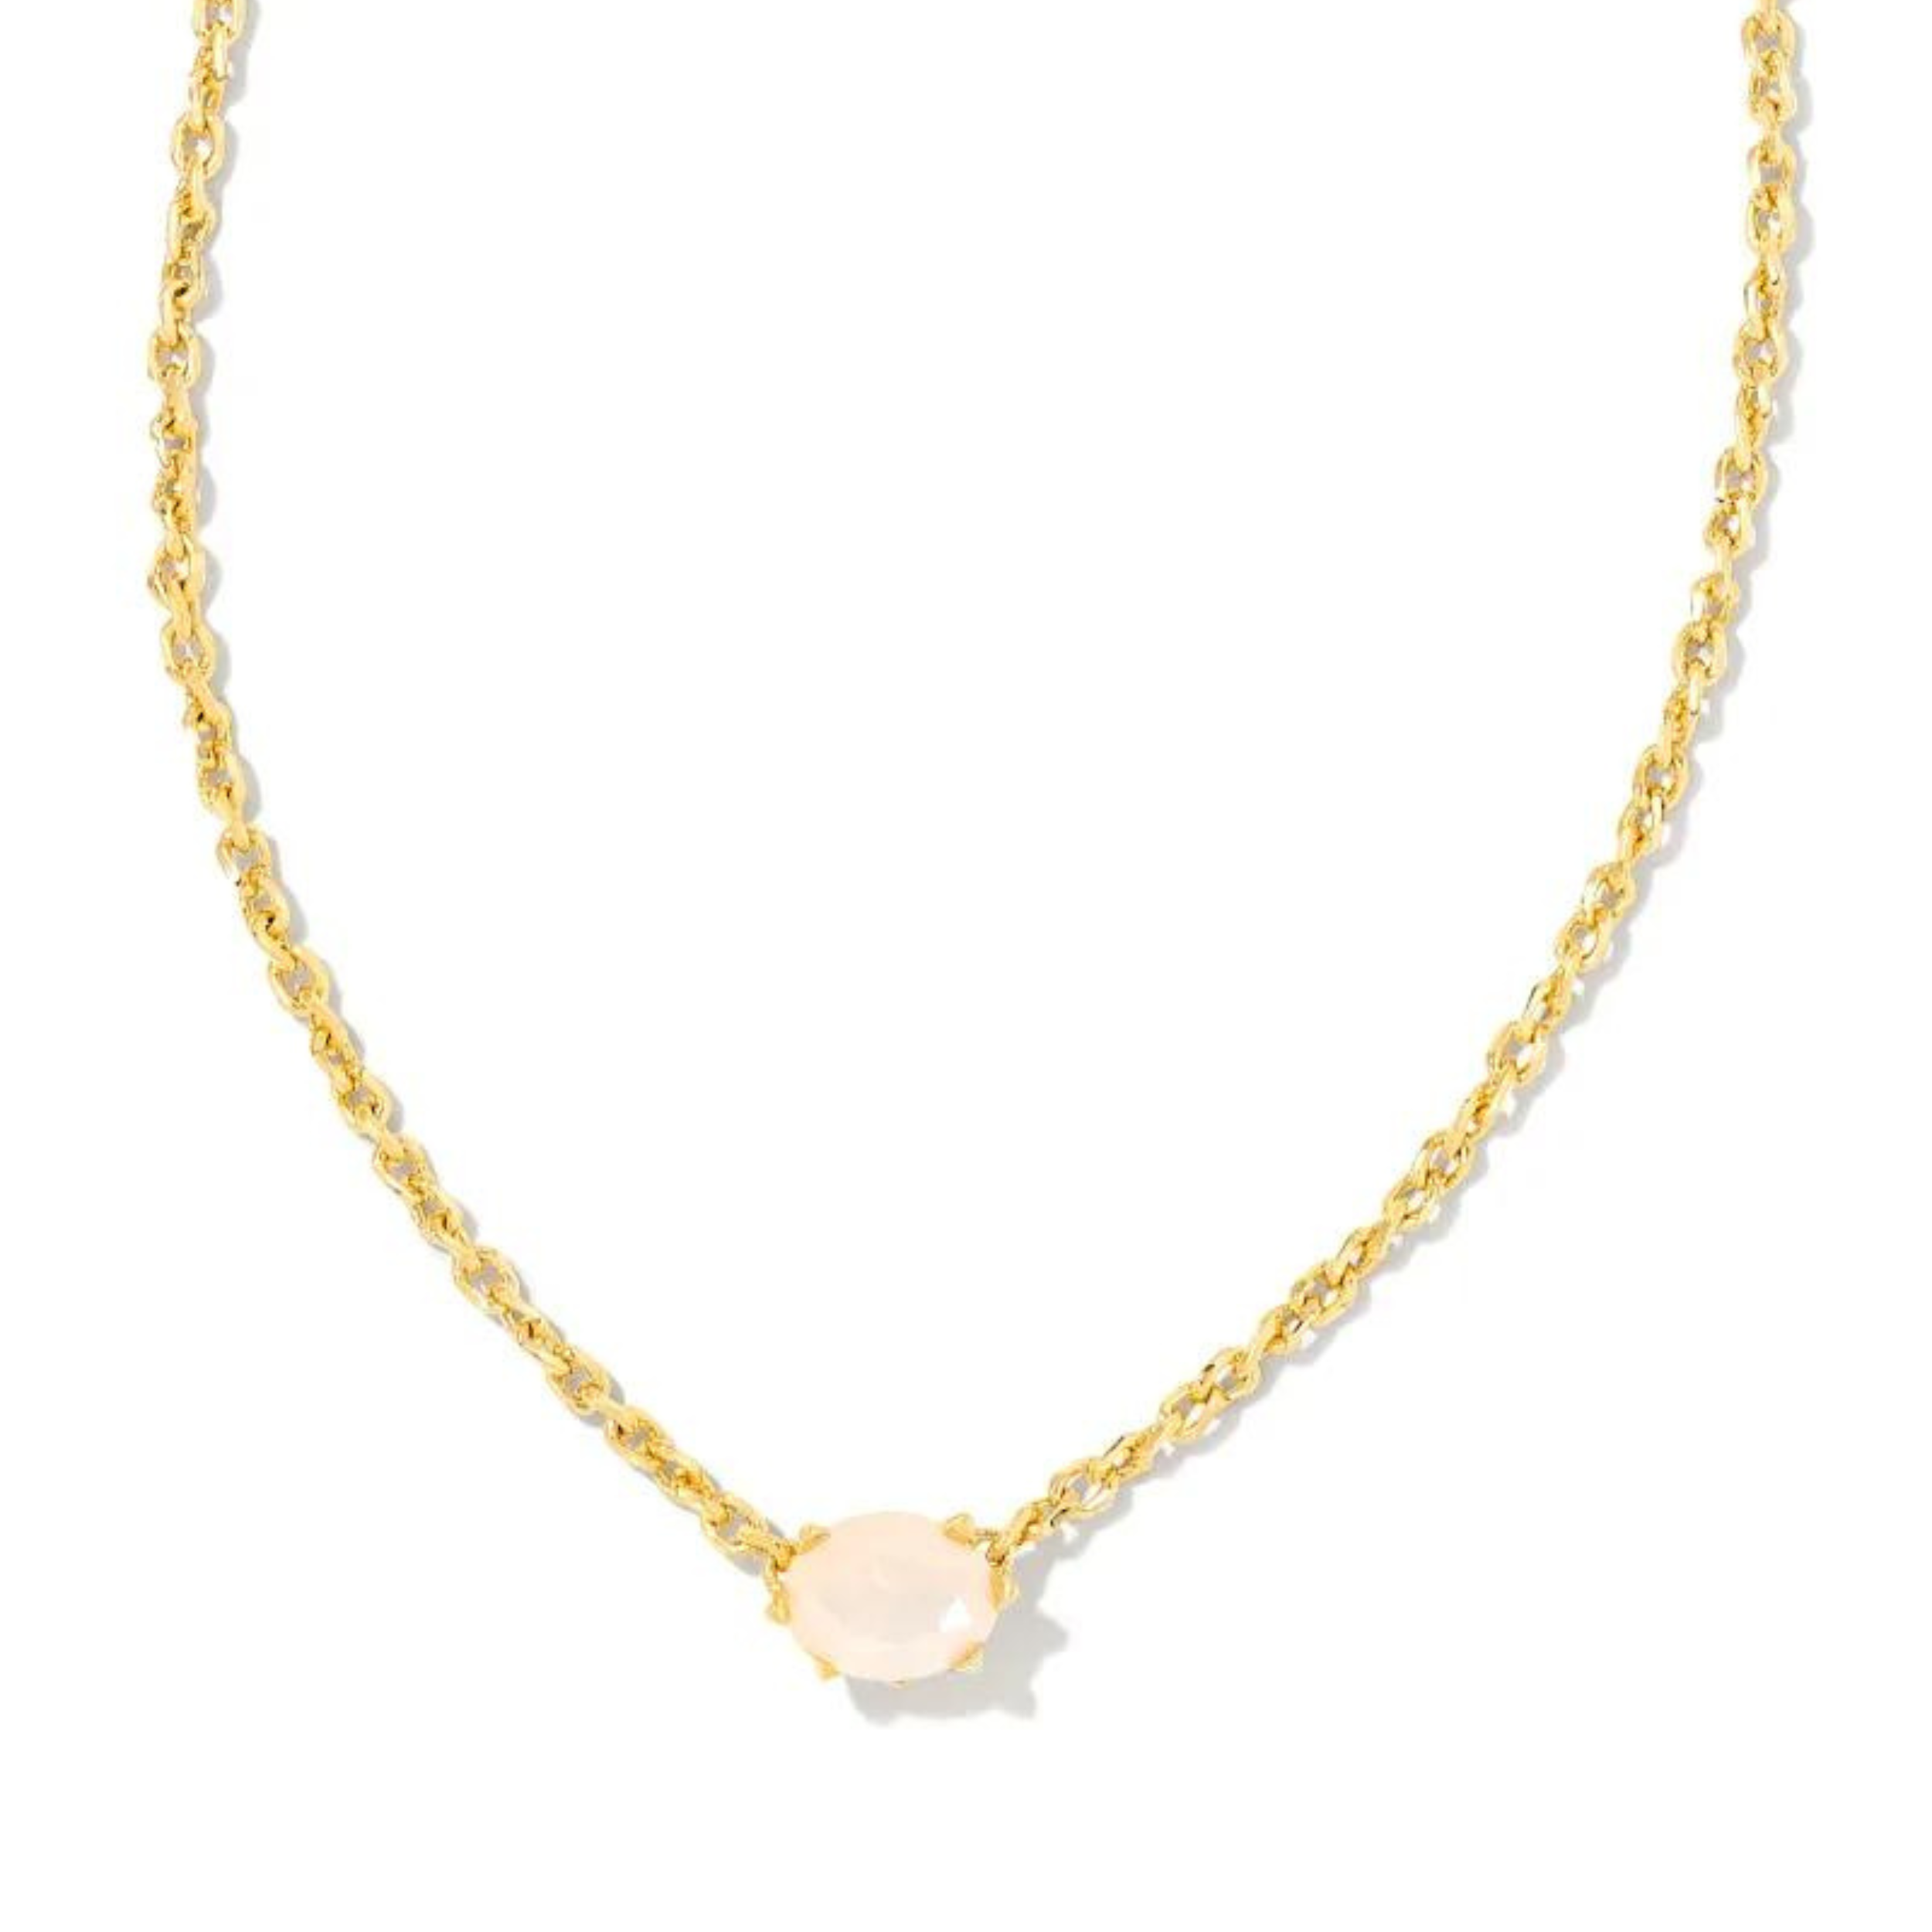 Kendra Scott | Cailin Gold Pendant Necklace in Champagne Opal Crystal - Giddy Up Glamour Boutique